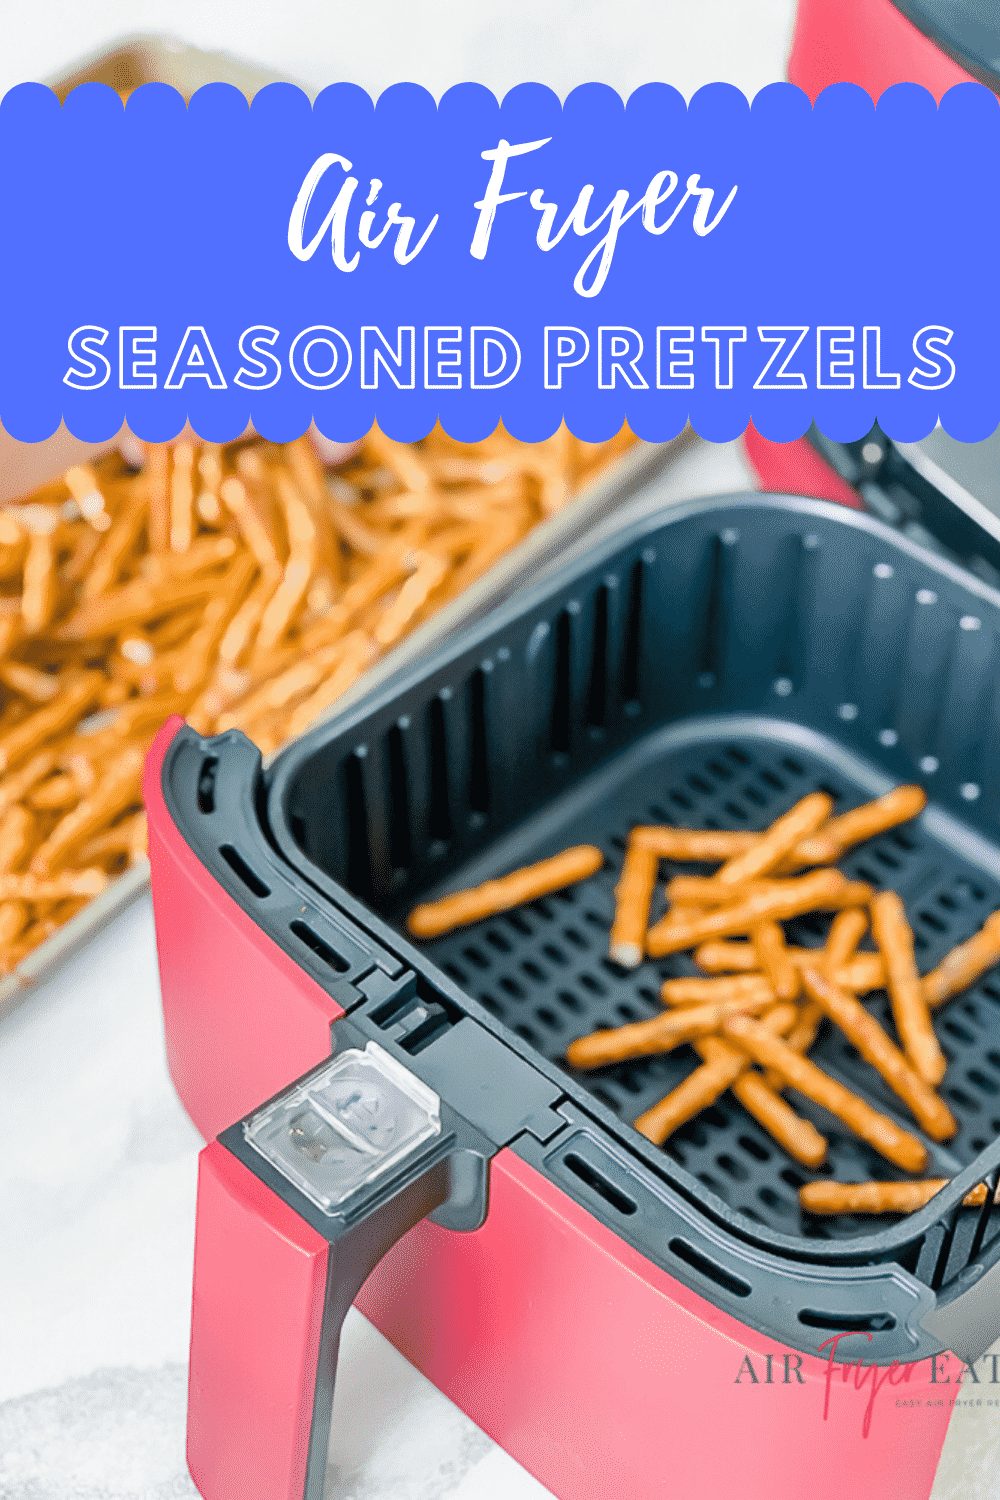 Calling all snackers! This seasoned air fryer pretzels recipe will make all snack lovers rejoice with happiness! At last, an easy seasoned pretzel recipe that will turn non-snackers into snack-a-holics when they taste these ranch pretzels. via @vegetarianmamma